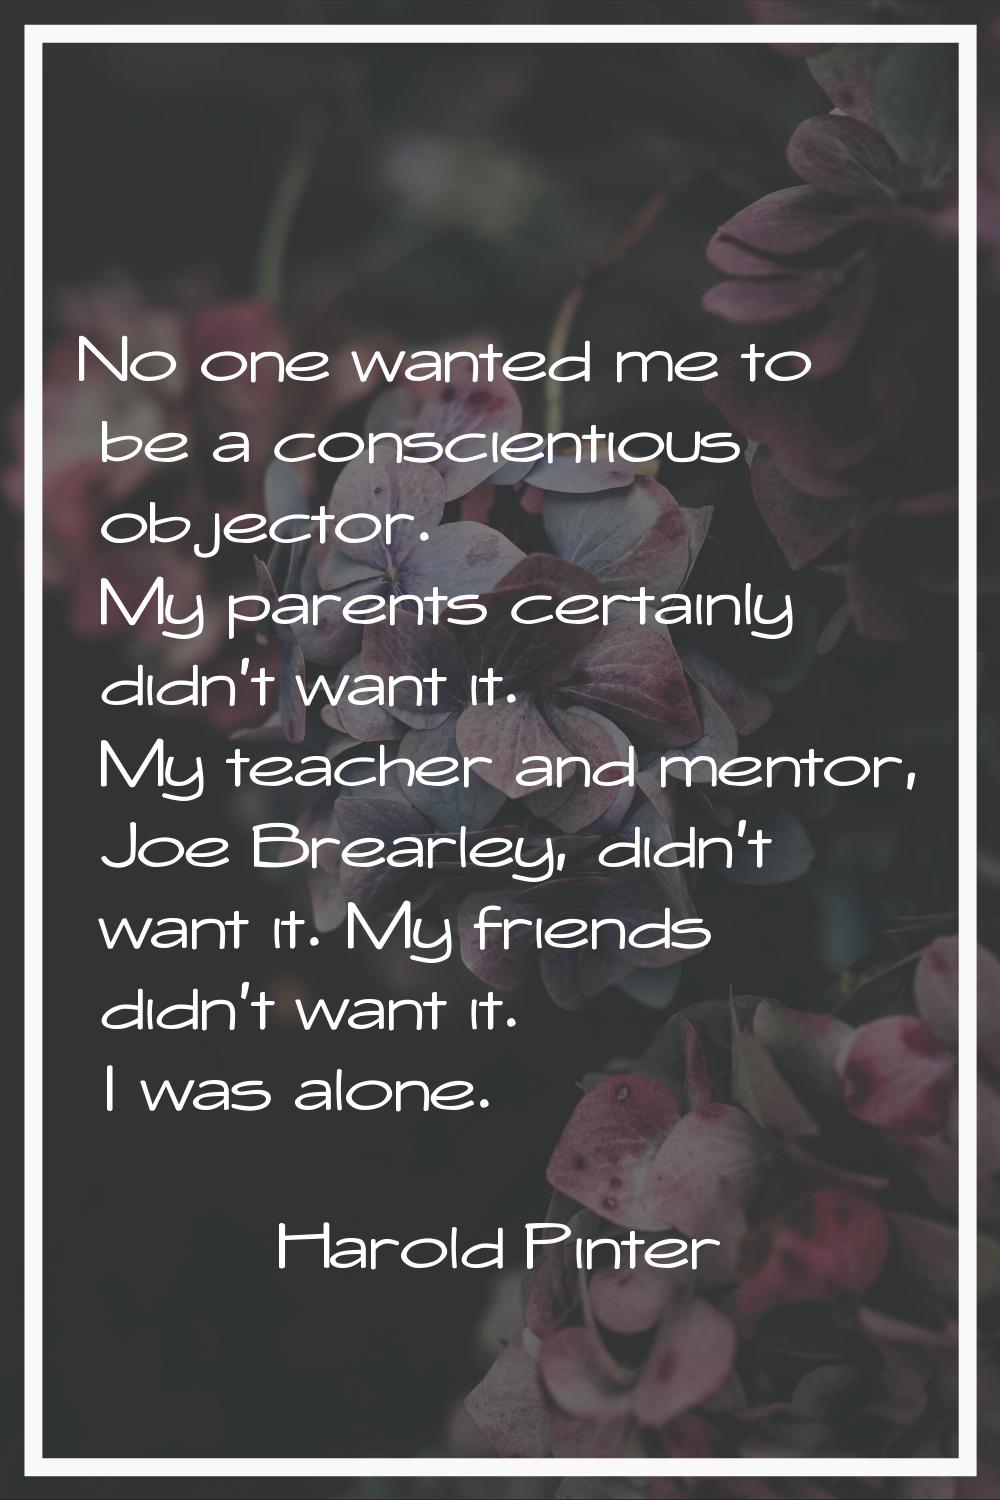 No one wanted me to be a conscientious objector. My parents certainly didn't want it. My teacher an